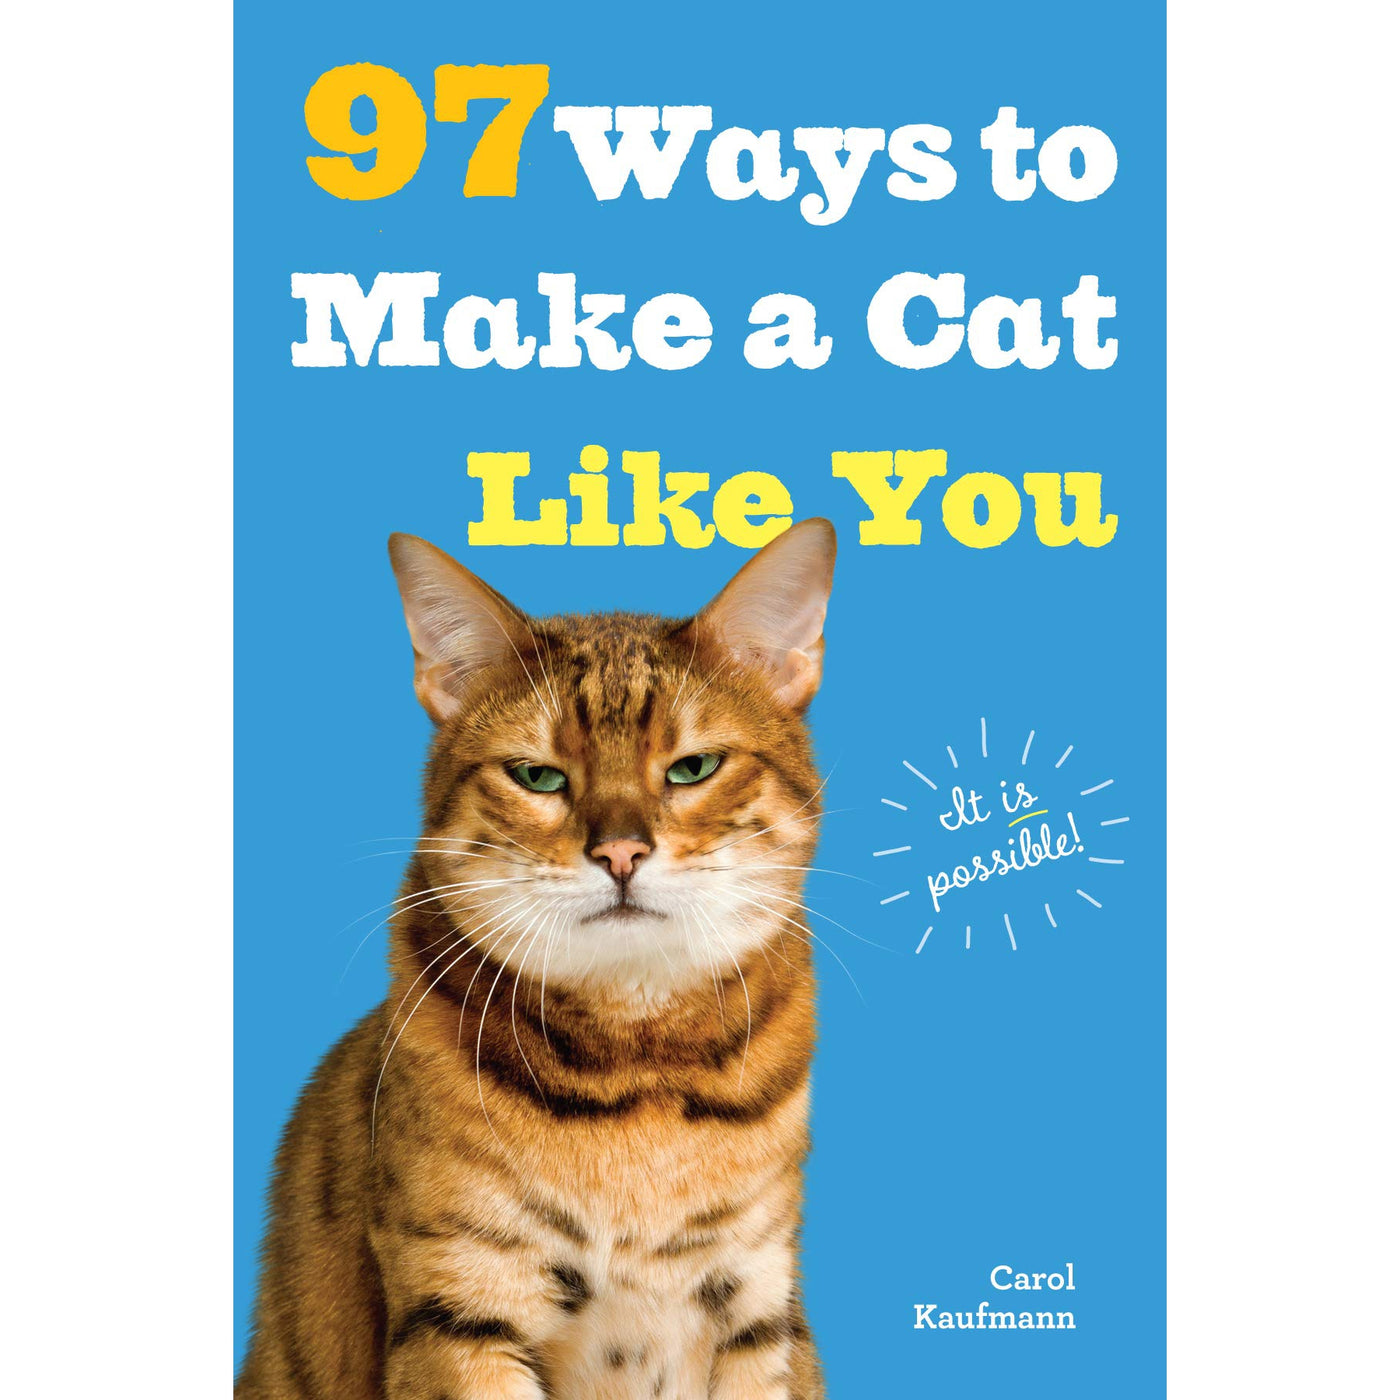 97 Ways to Make a Cat Like You - Just Fabulous Palm Springs